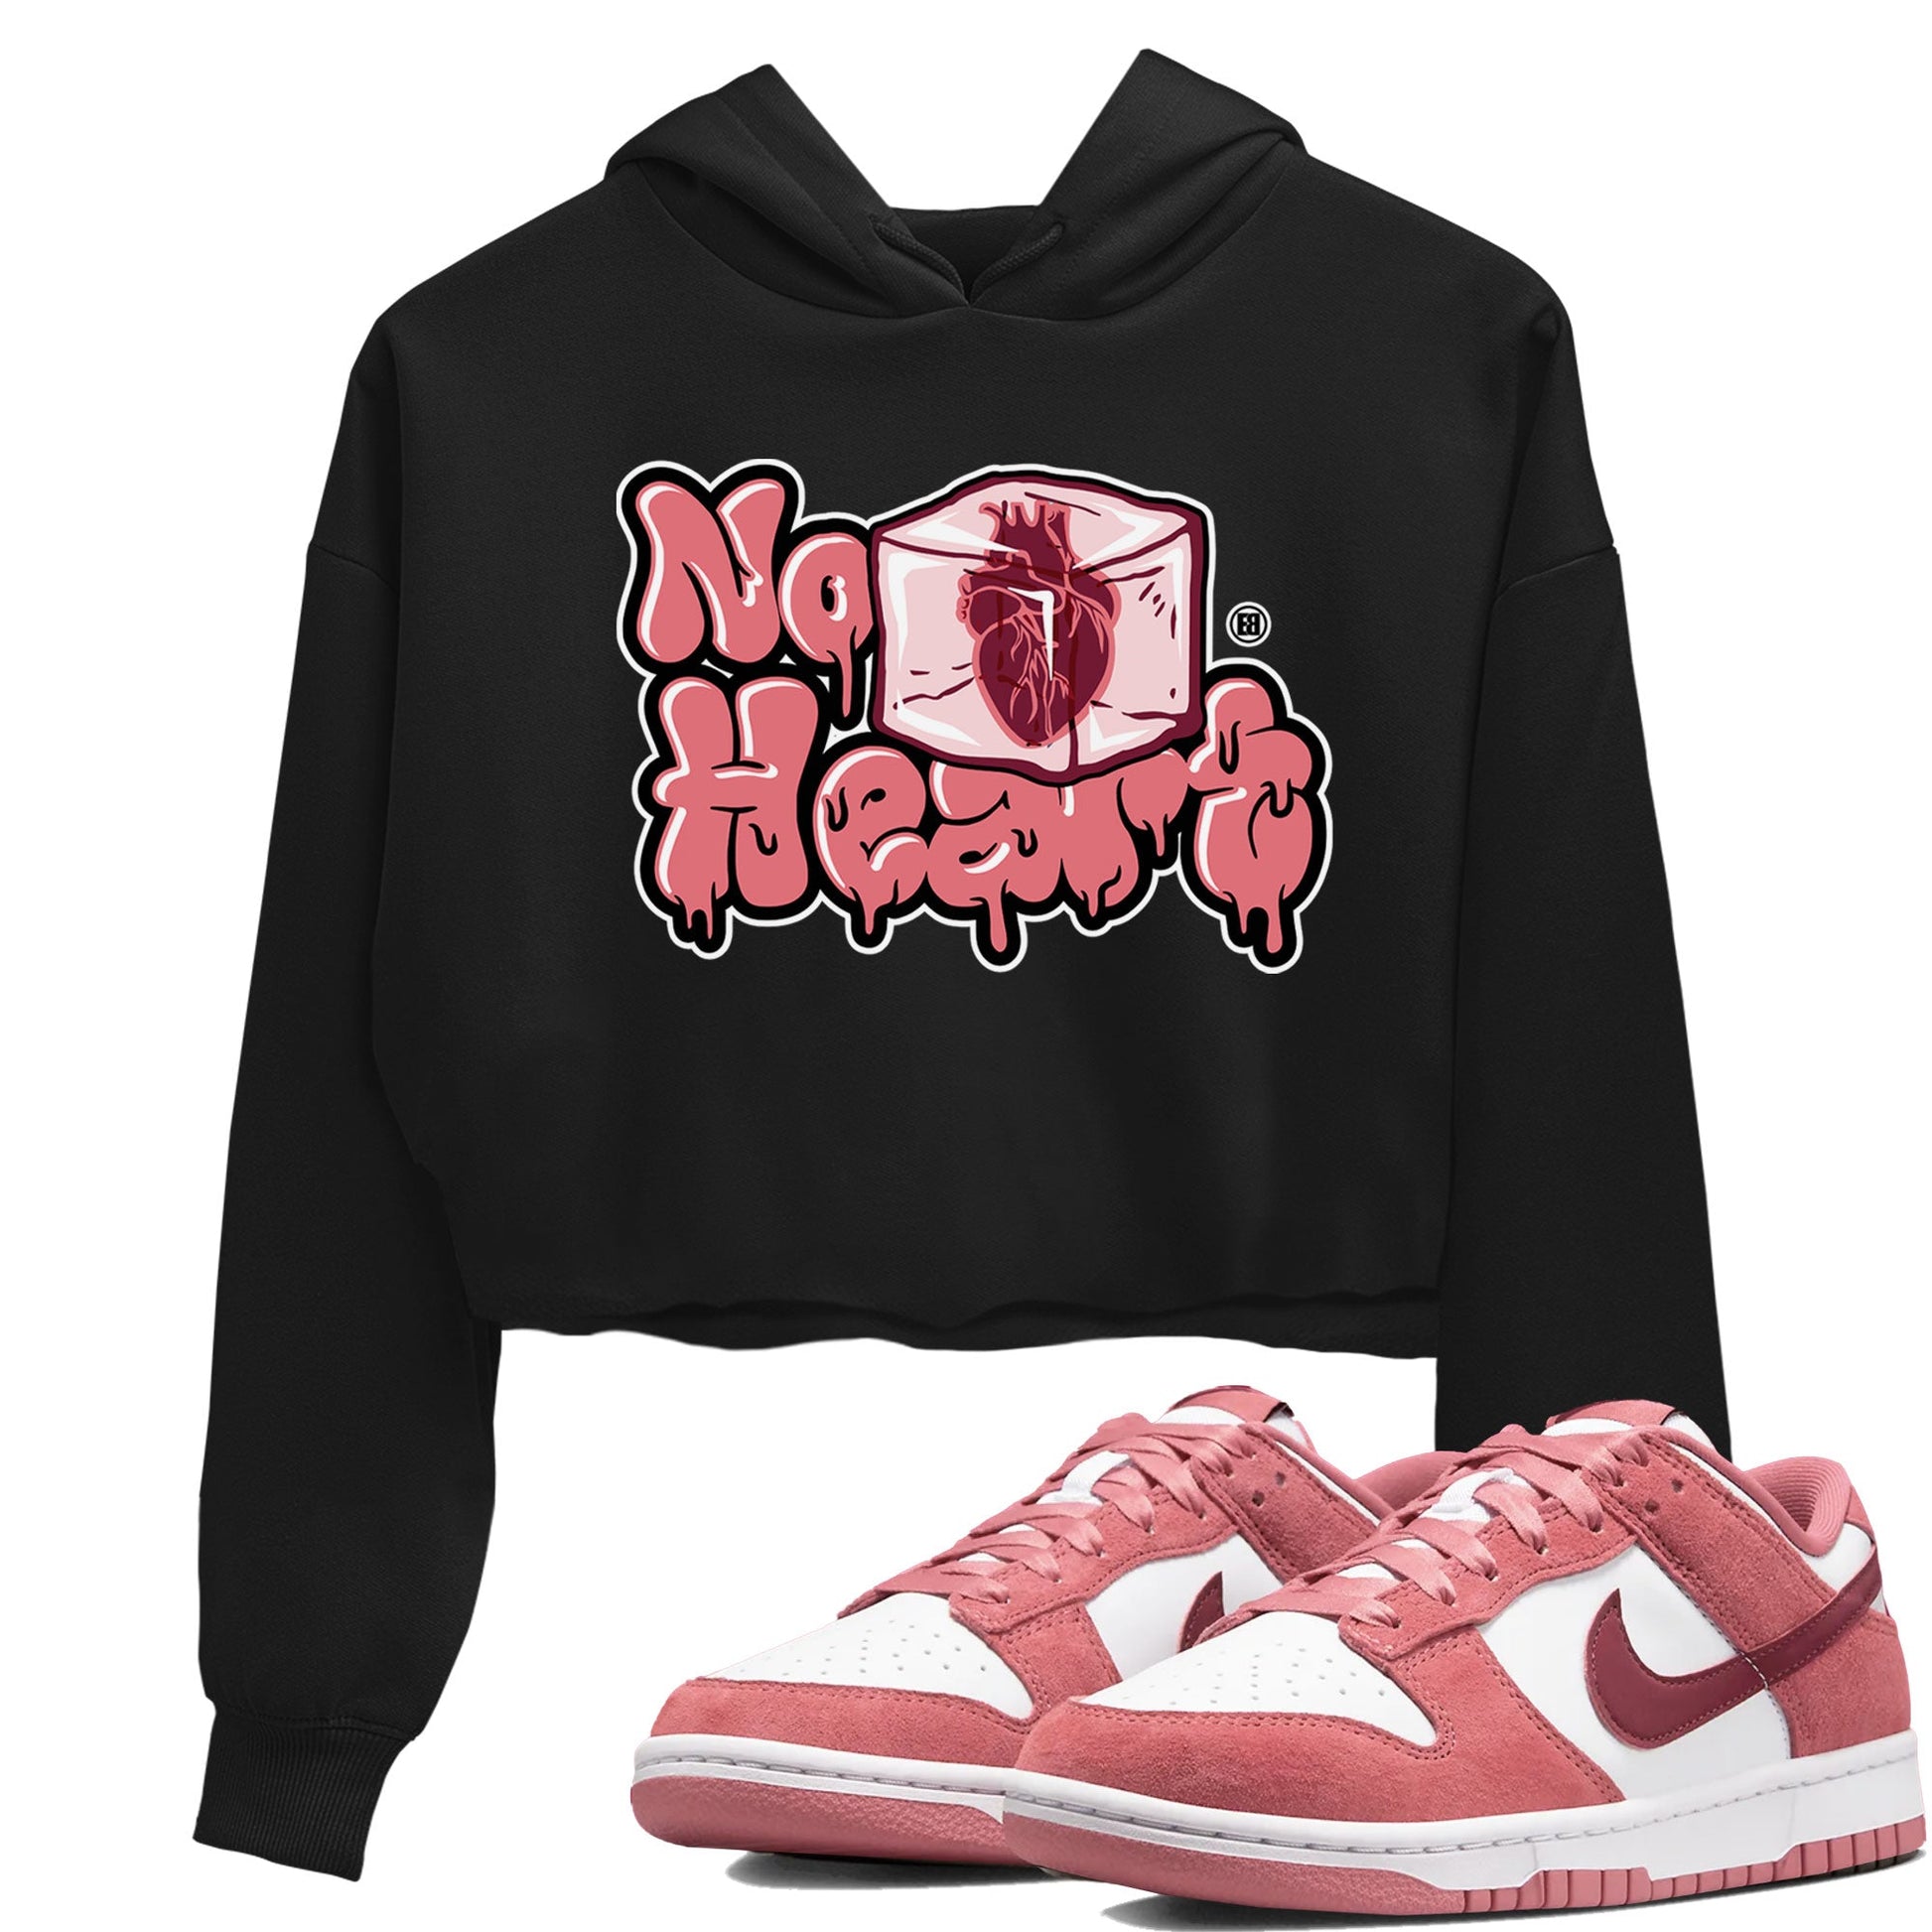 Dunk Valentines Day shirt to match jordans No Hearts sneaker tees Dunk Low Valentine's Day SNRT Sneaker Release Tees Black 1 Crop T-Shirt